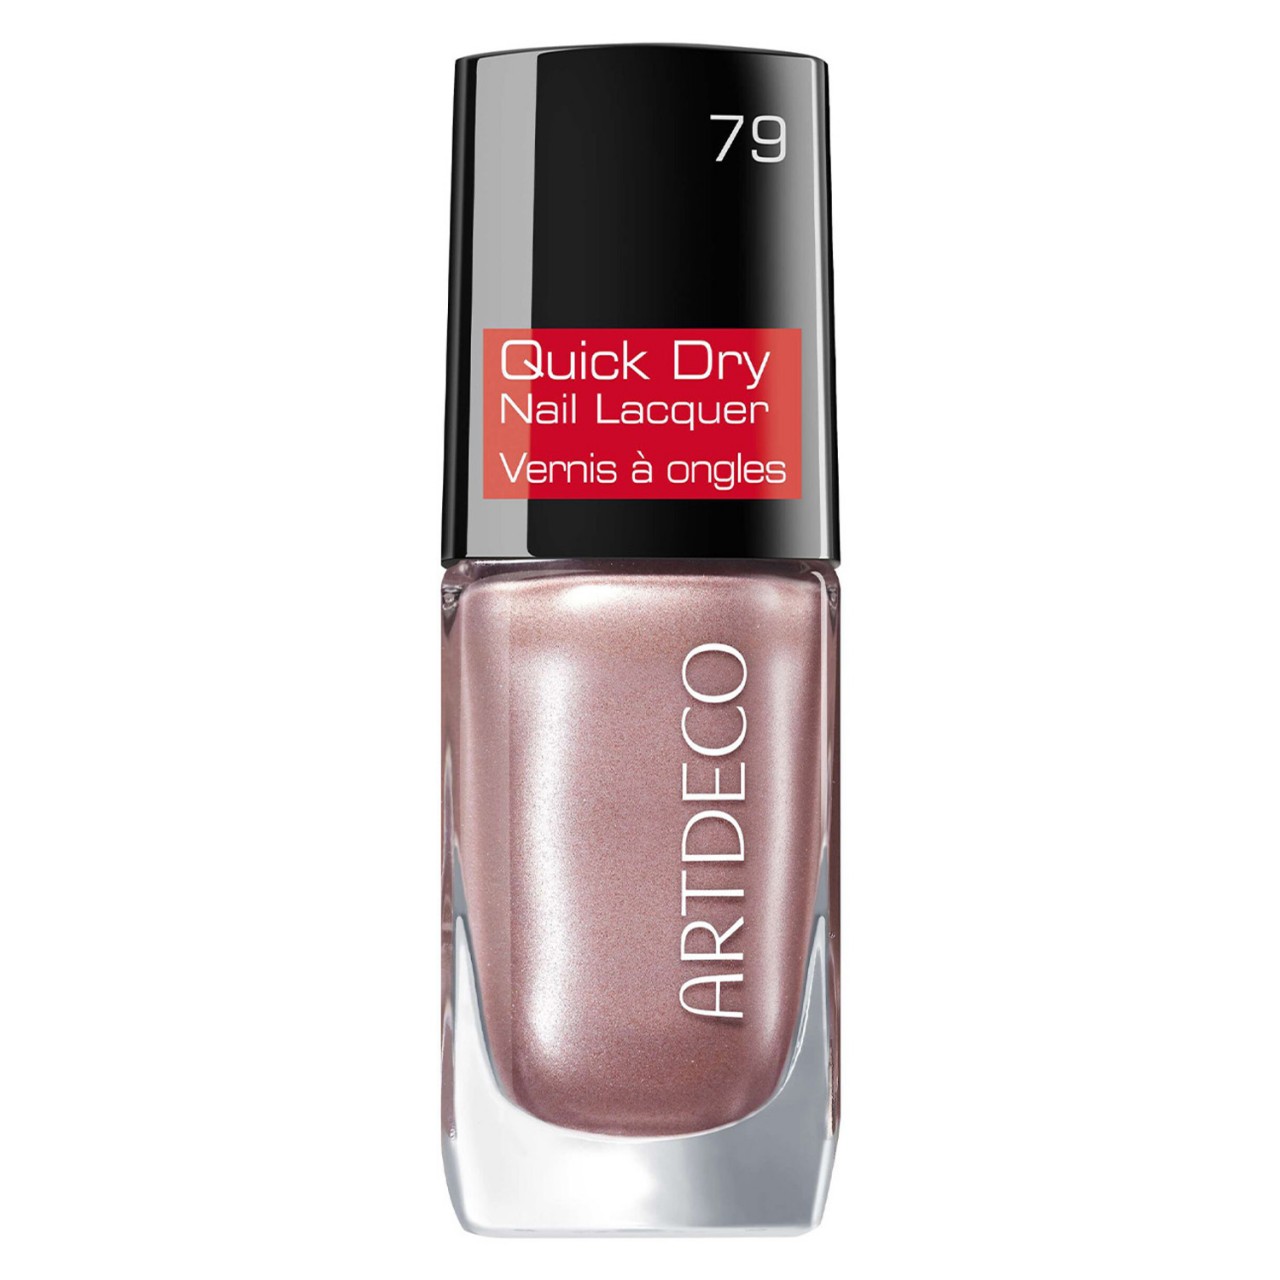 Quick Dry - Nail Lacquer Iced Rose 79 von Artdeco